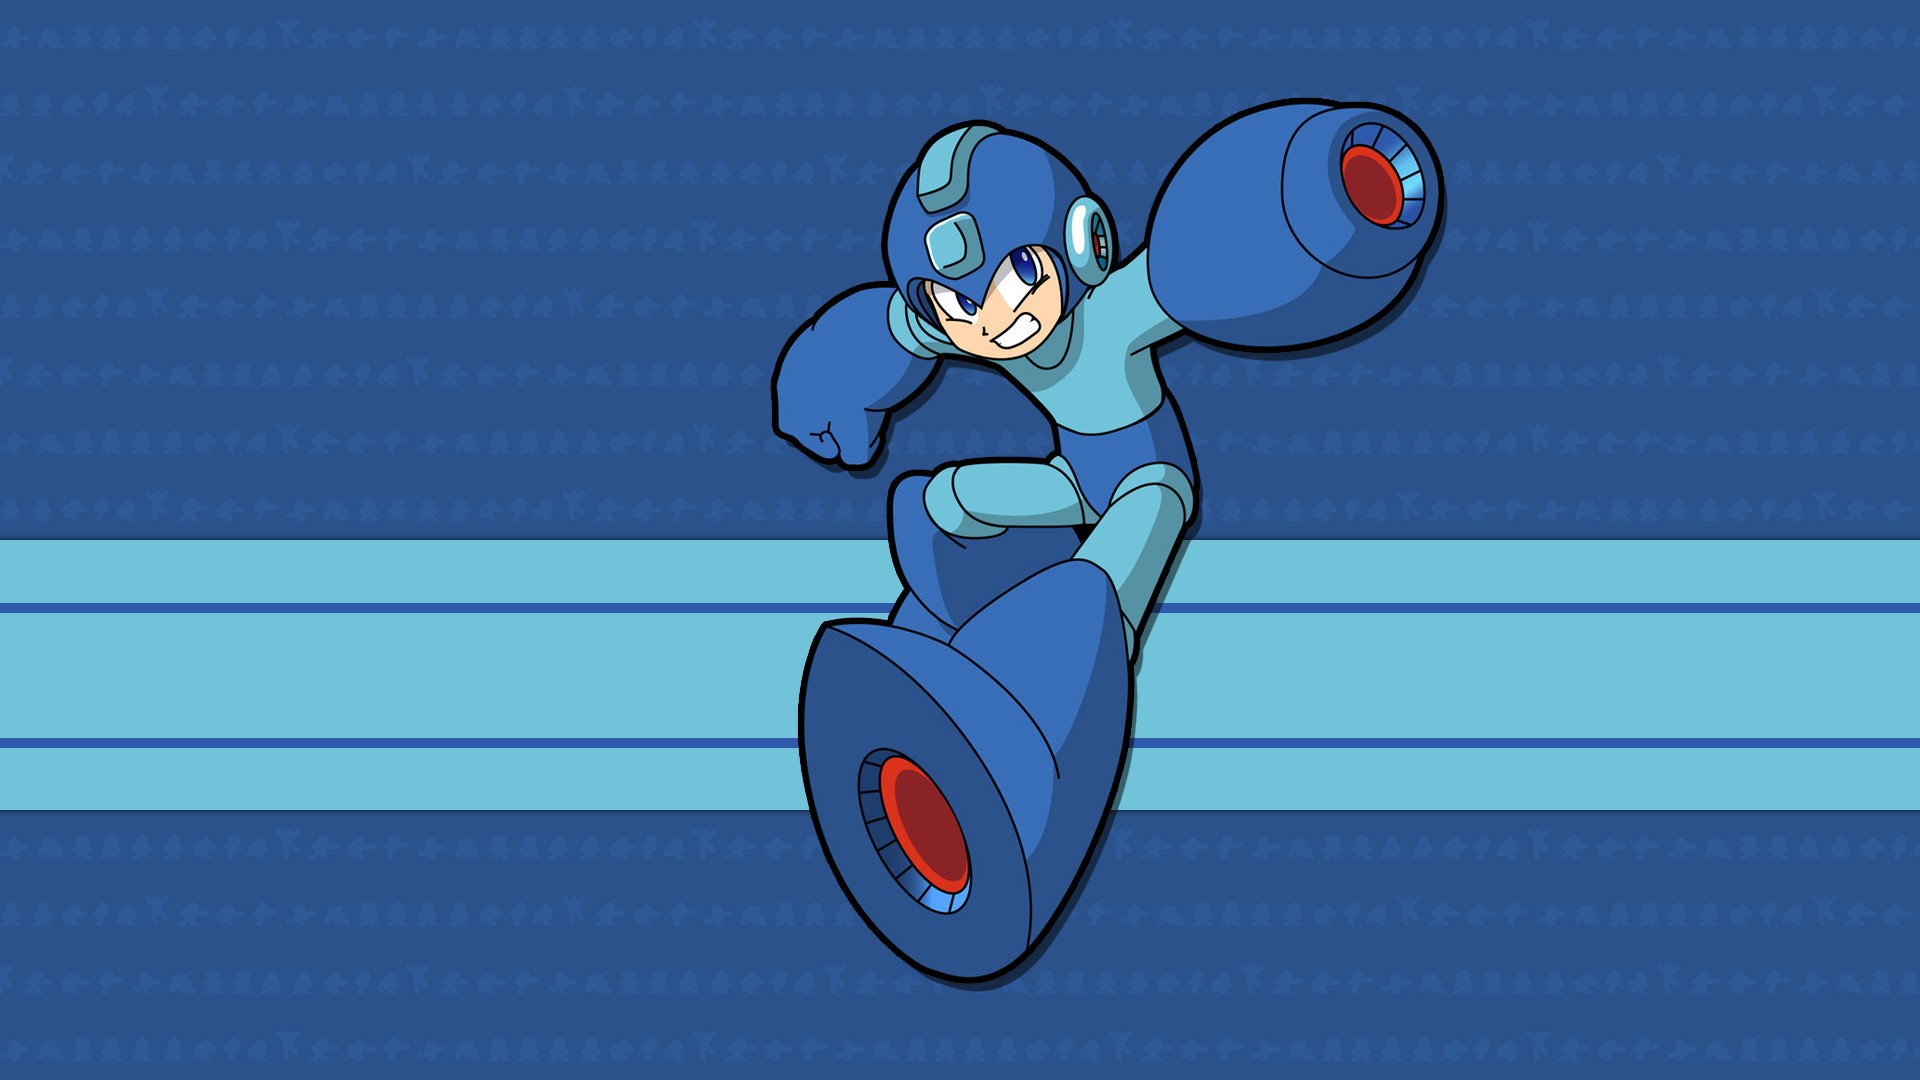 MegaMan iPhone iOS 4 Home Screen Wallpaper Collection Download  KRAPPS   a different and funny iPhone app review site